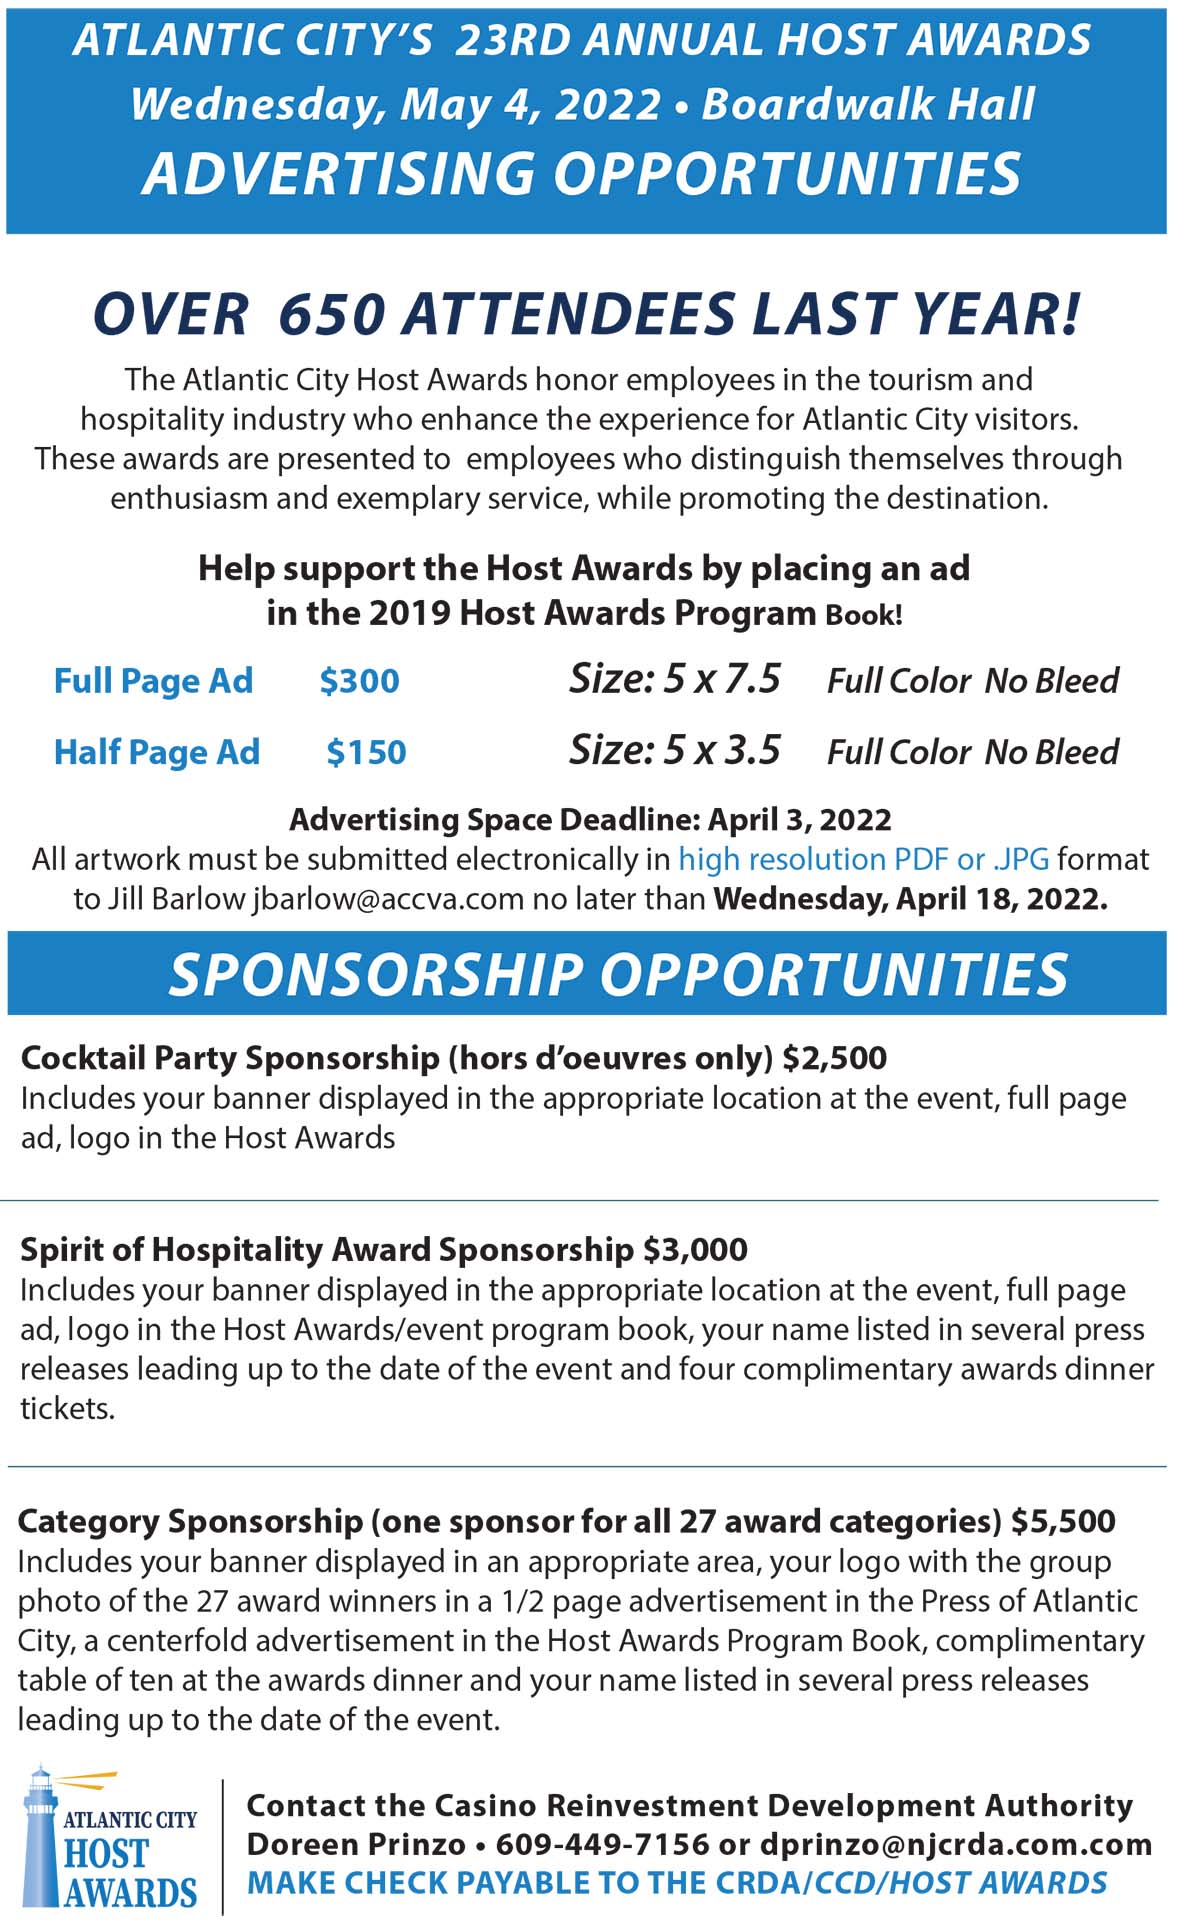 Atlantic City’s 23rd Annual Host Awards Wednesday, May 4, 2022. Boardwalk Hall Advertising Opportunities. Download PDF above for full information.